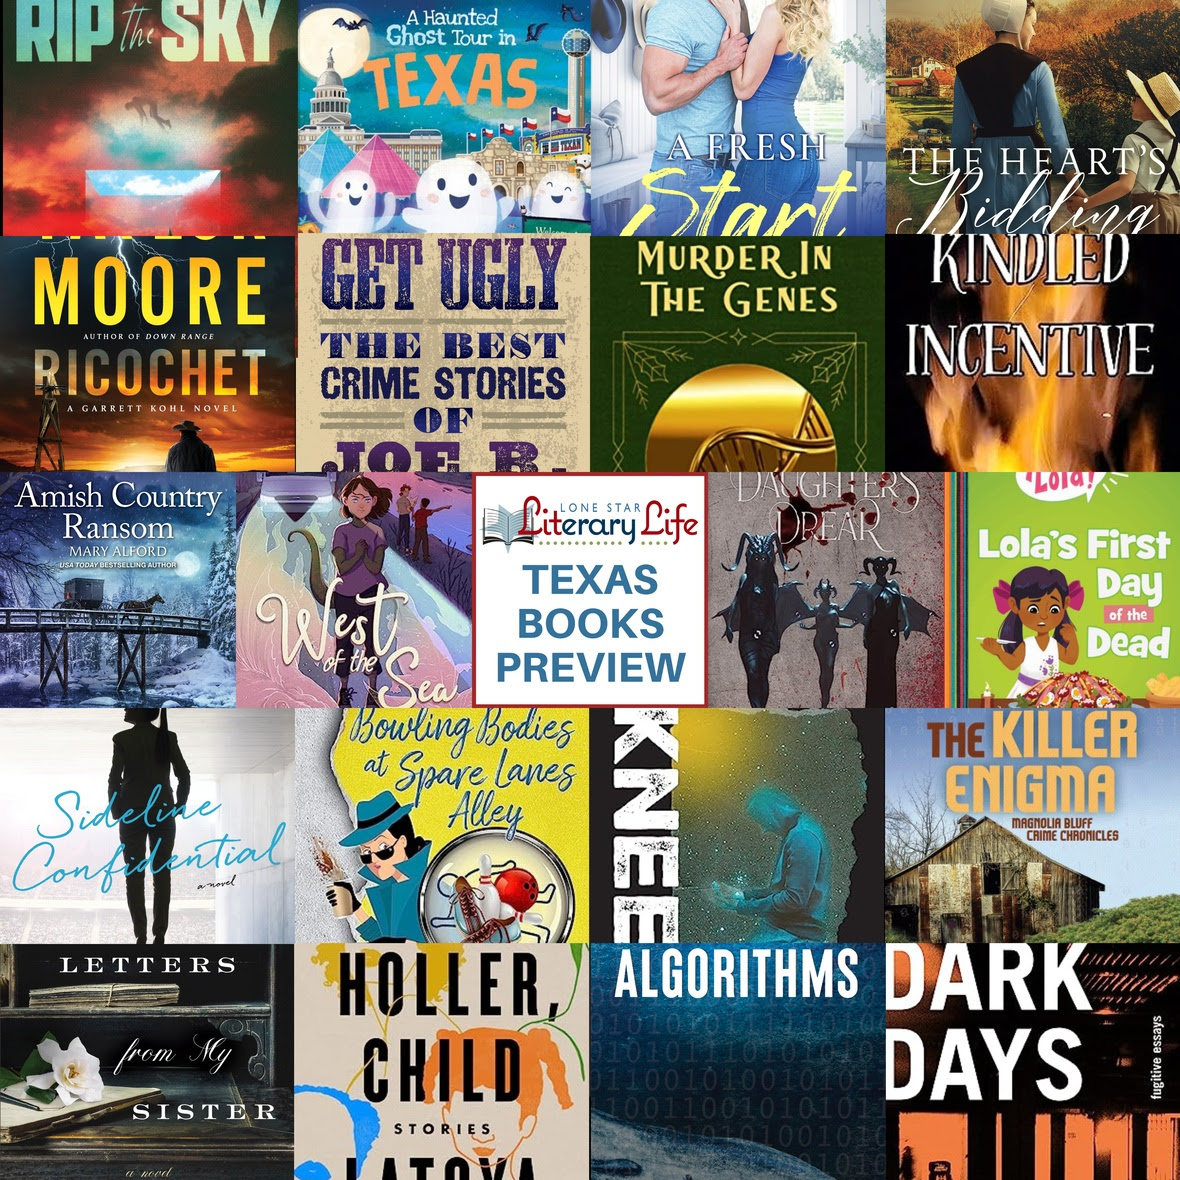 August 23 Texas Books Preview Montage